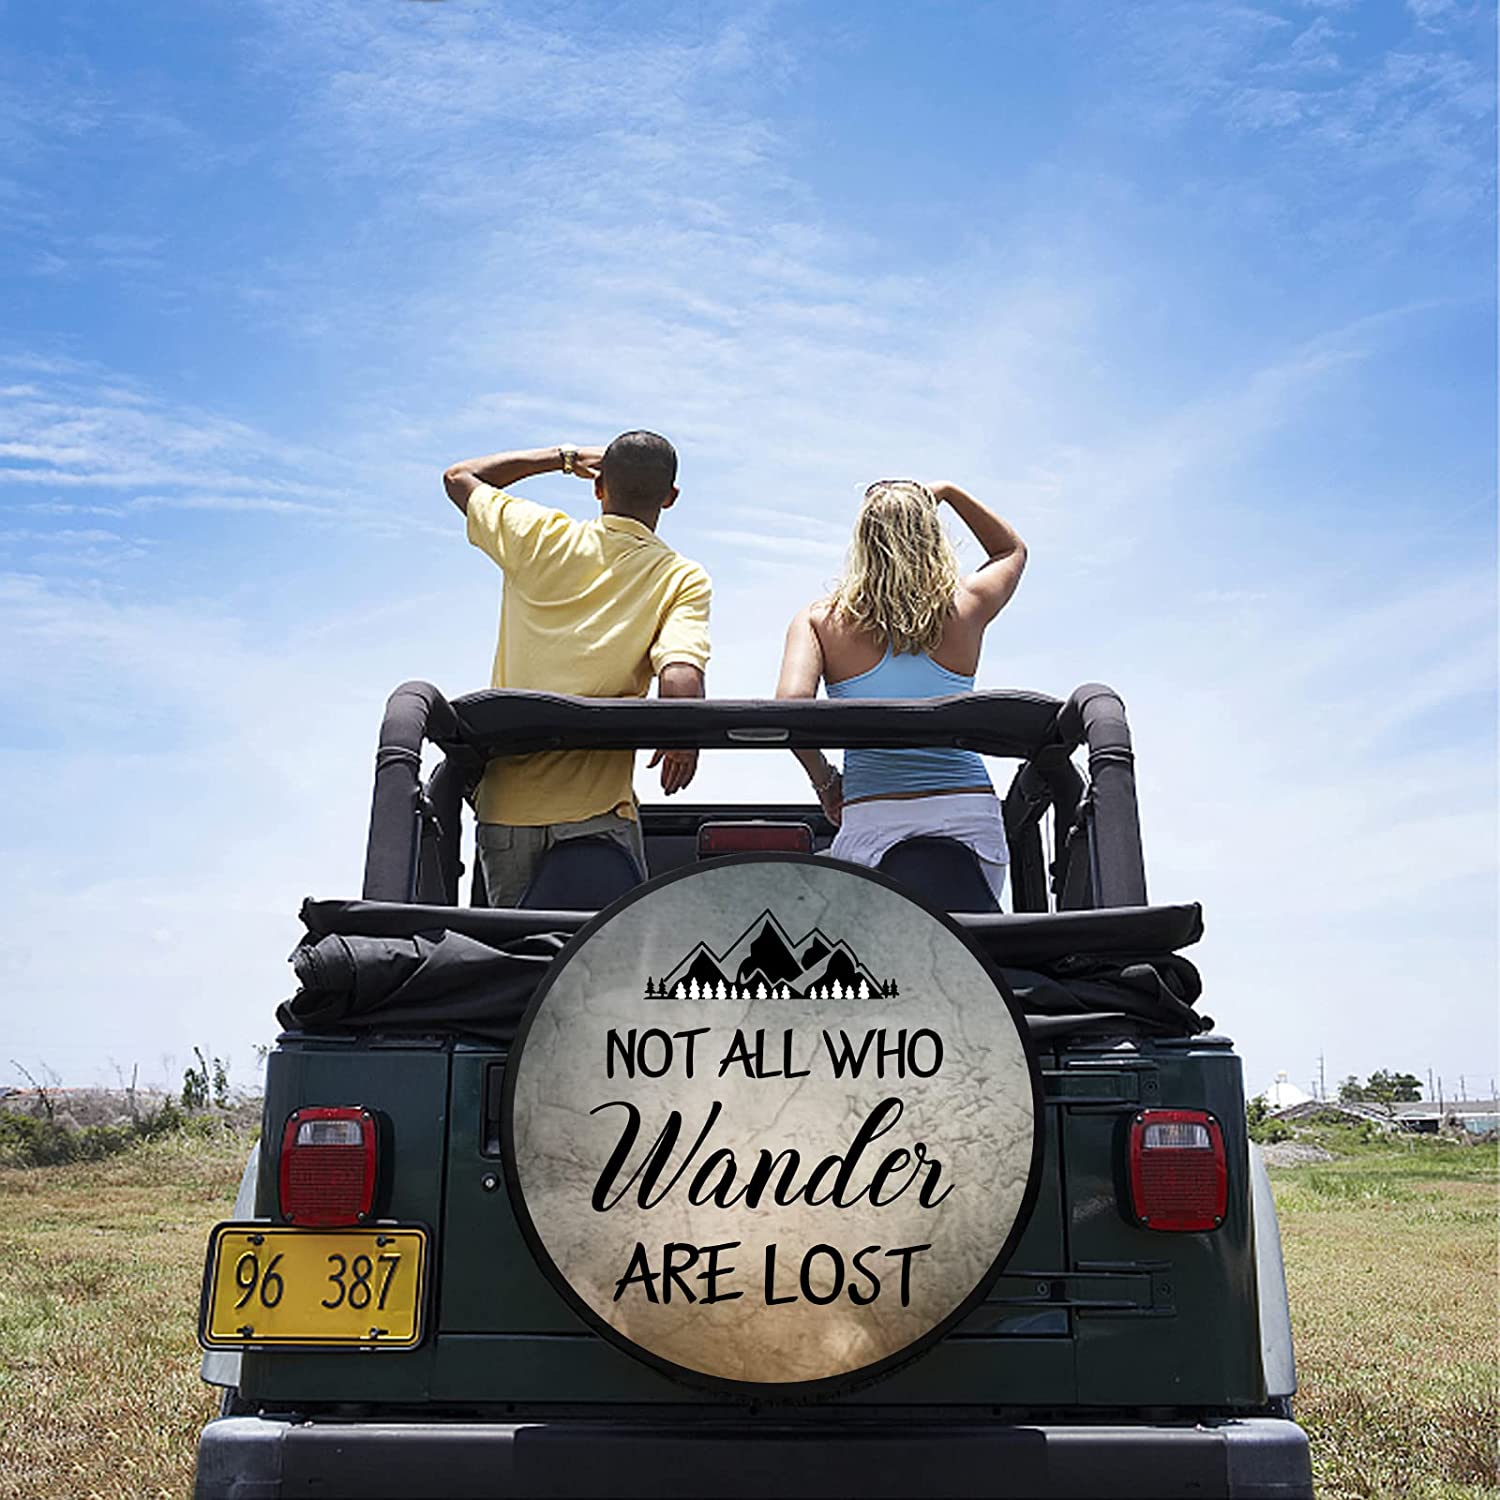 NOT All WHO Wander are Lost Pattern Universal Spare Wheel Tire Cover  Waterproof Dust-Proof for Truck SUV Motorhome Camper Accessories 